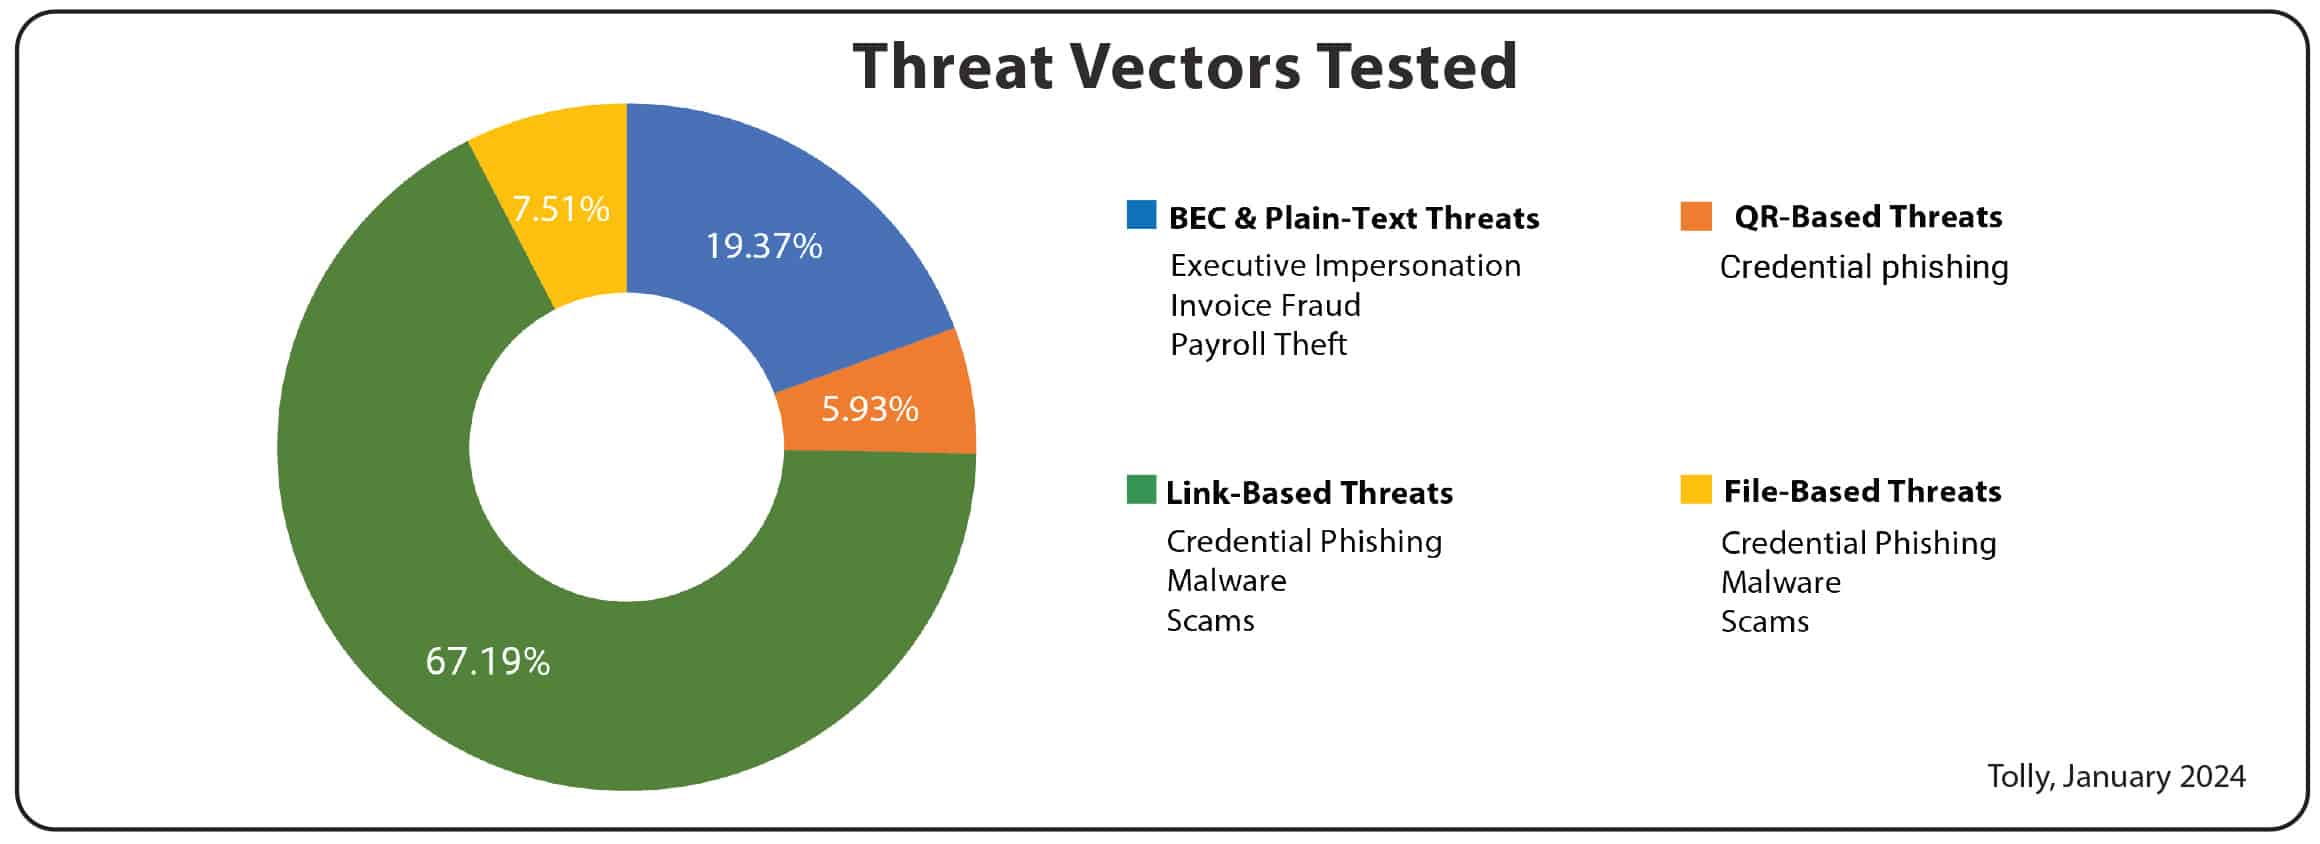 For cloud email security solutions to be effective, they must demonstrate strong efficacy against threats across all four vectors shown.